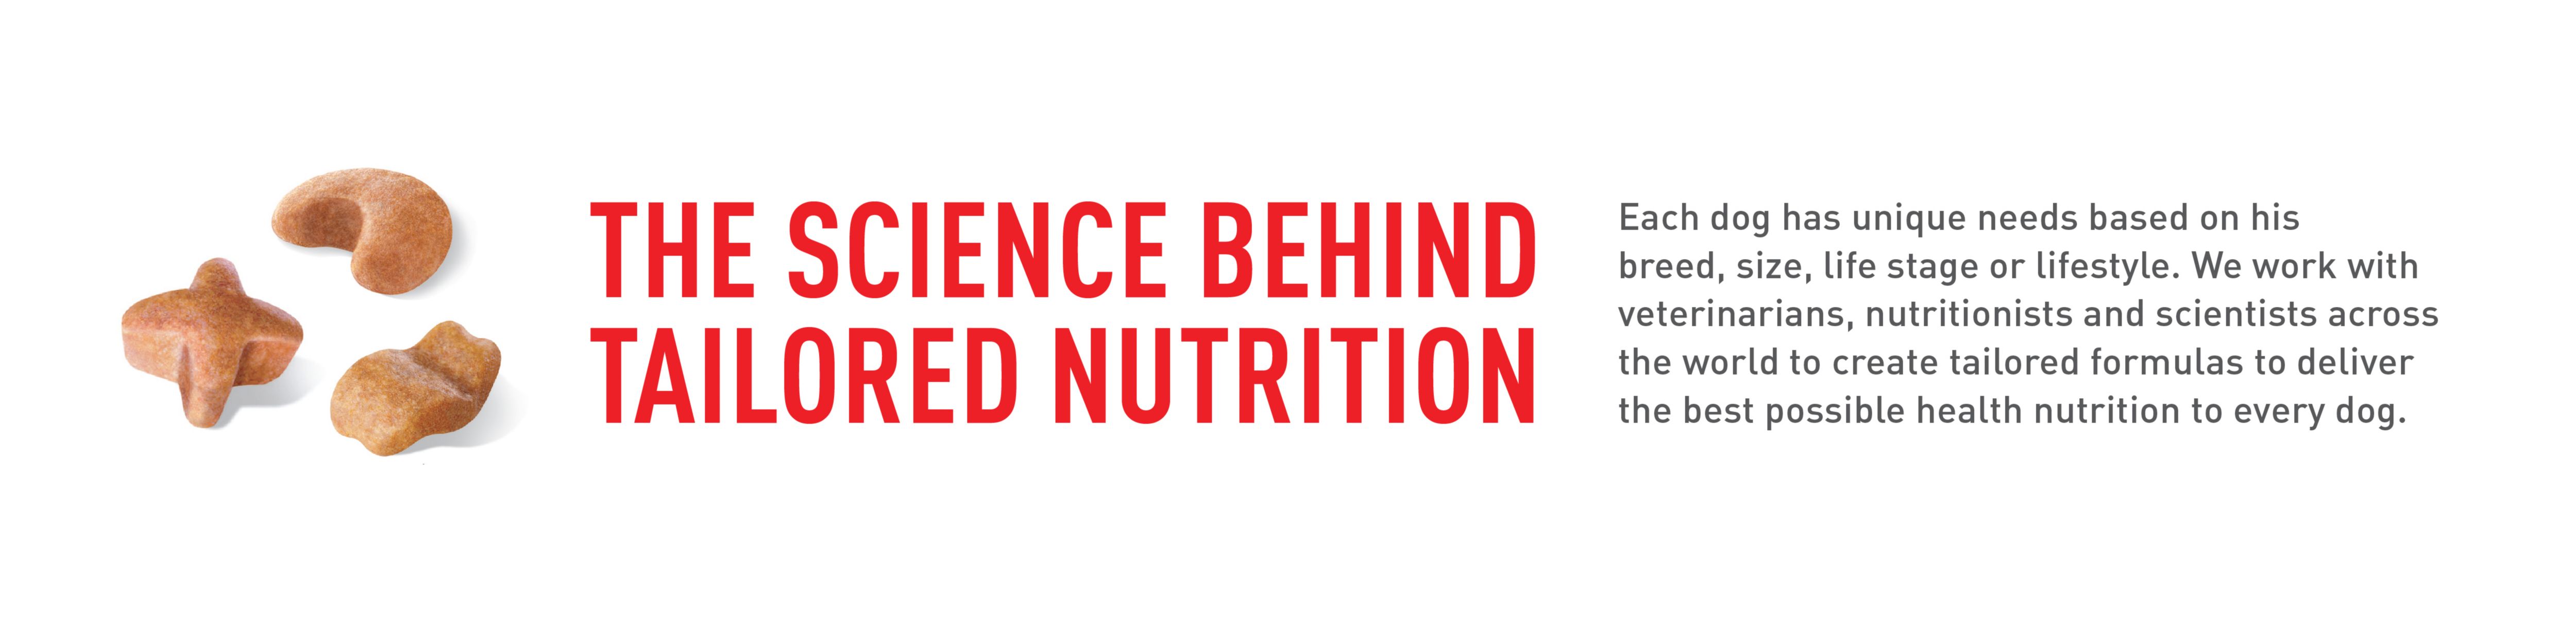 The Science behind tailored nurtrition